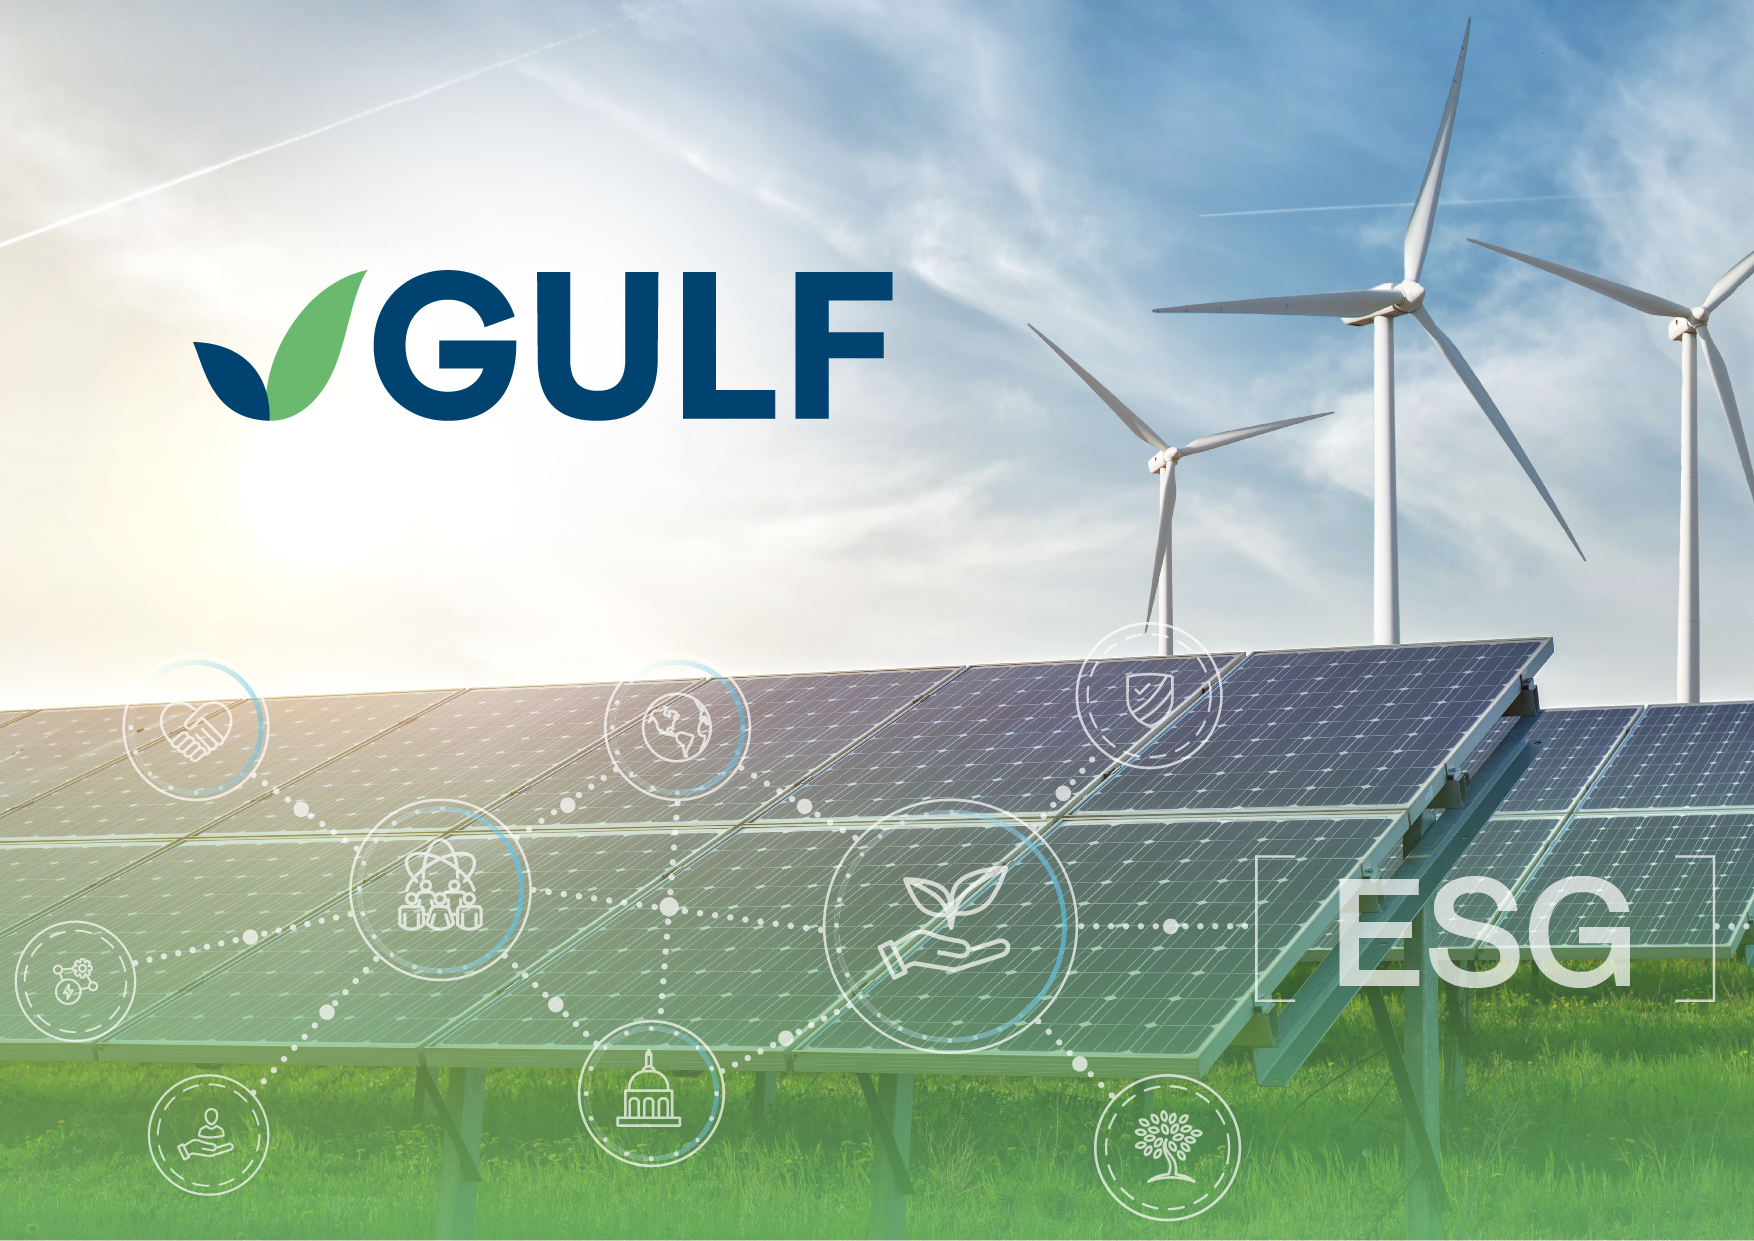 GULF invests in LCI fund, striding forward to renewable energy and sustainable investments